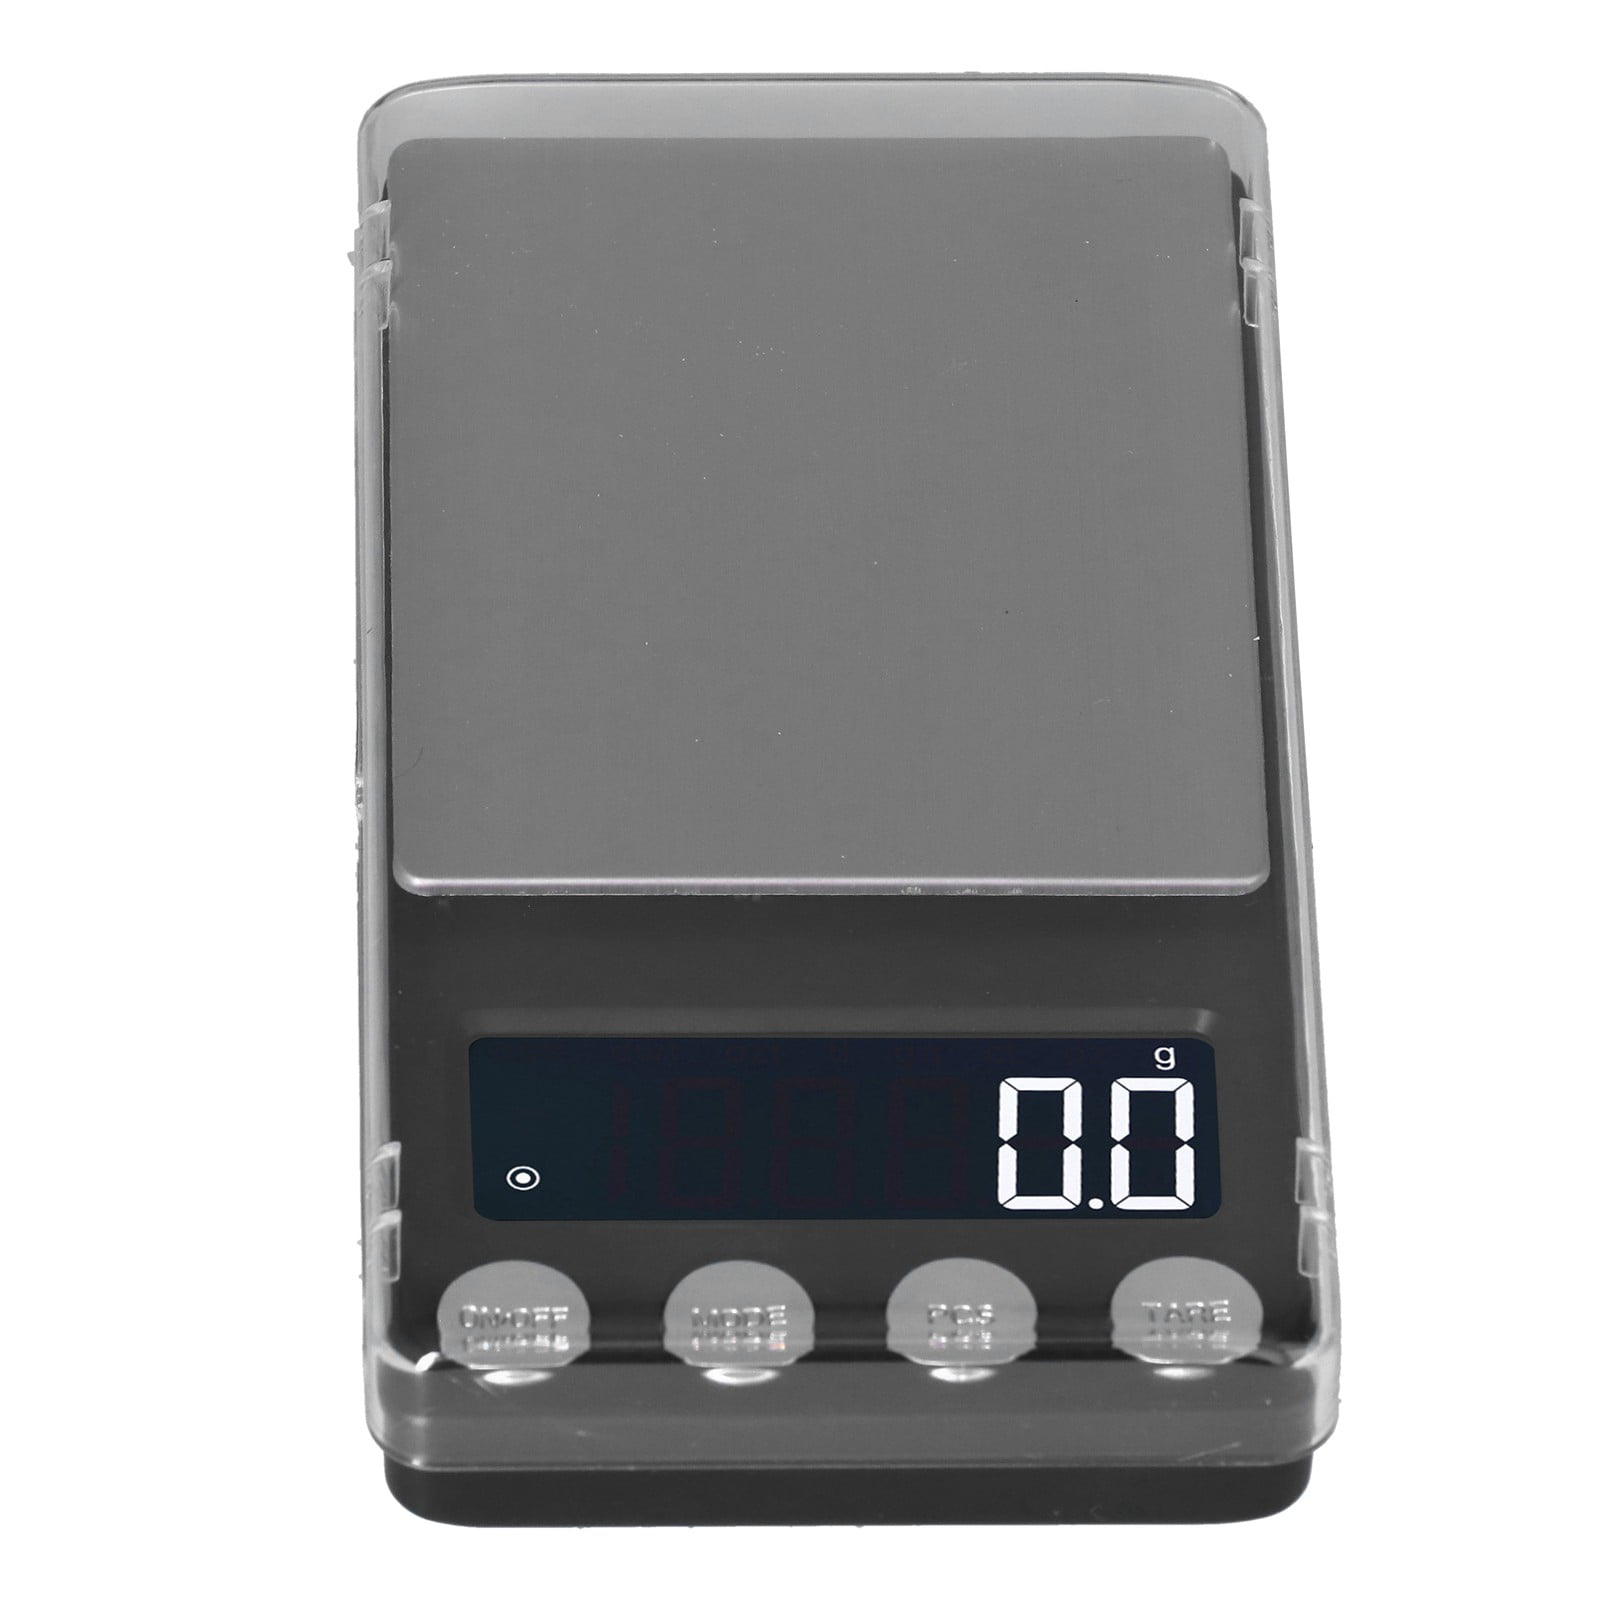 NEW Frankford DS750 Digital Reloading Scale 205205 